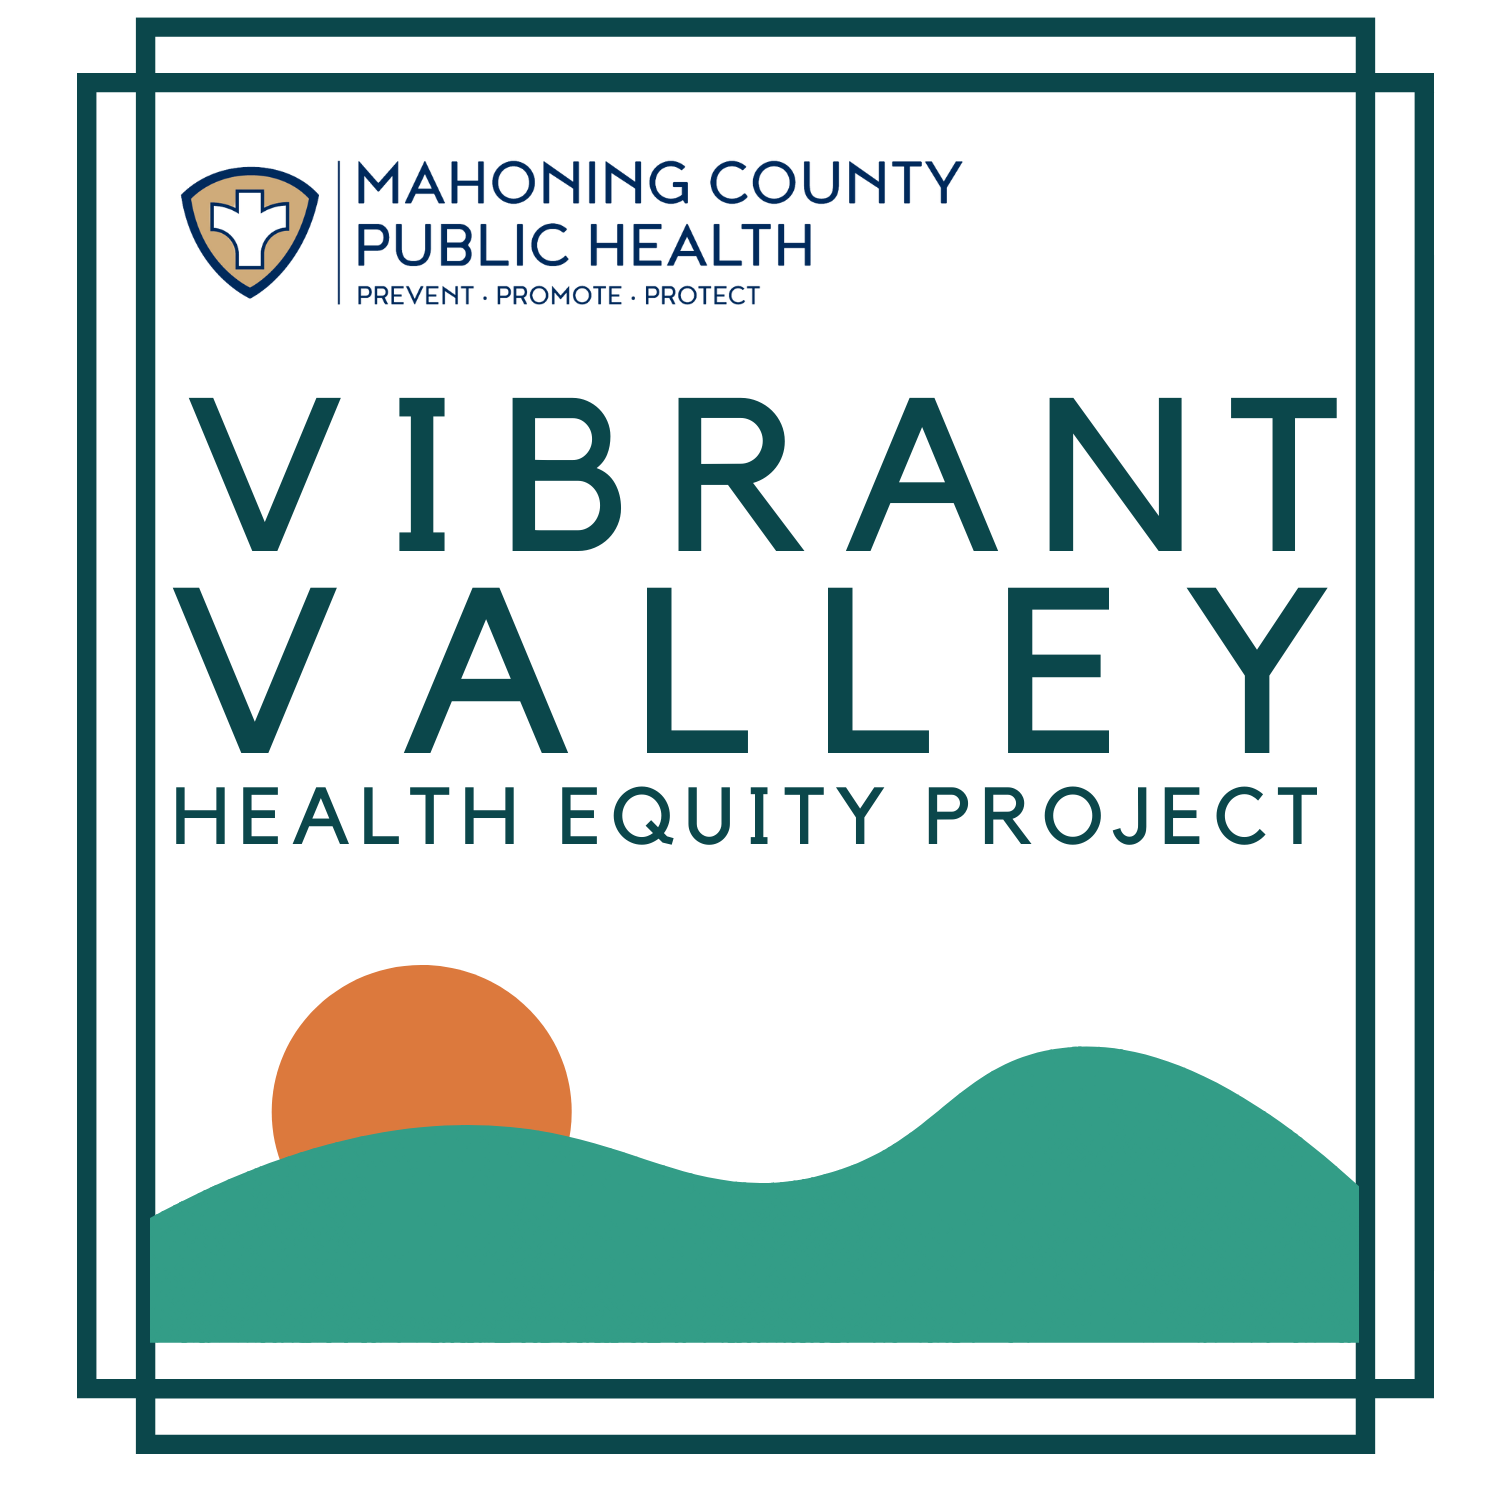 Vibrant Valley Health Equity Project